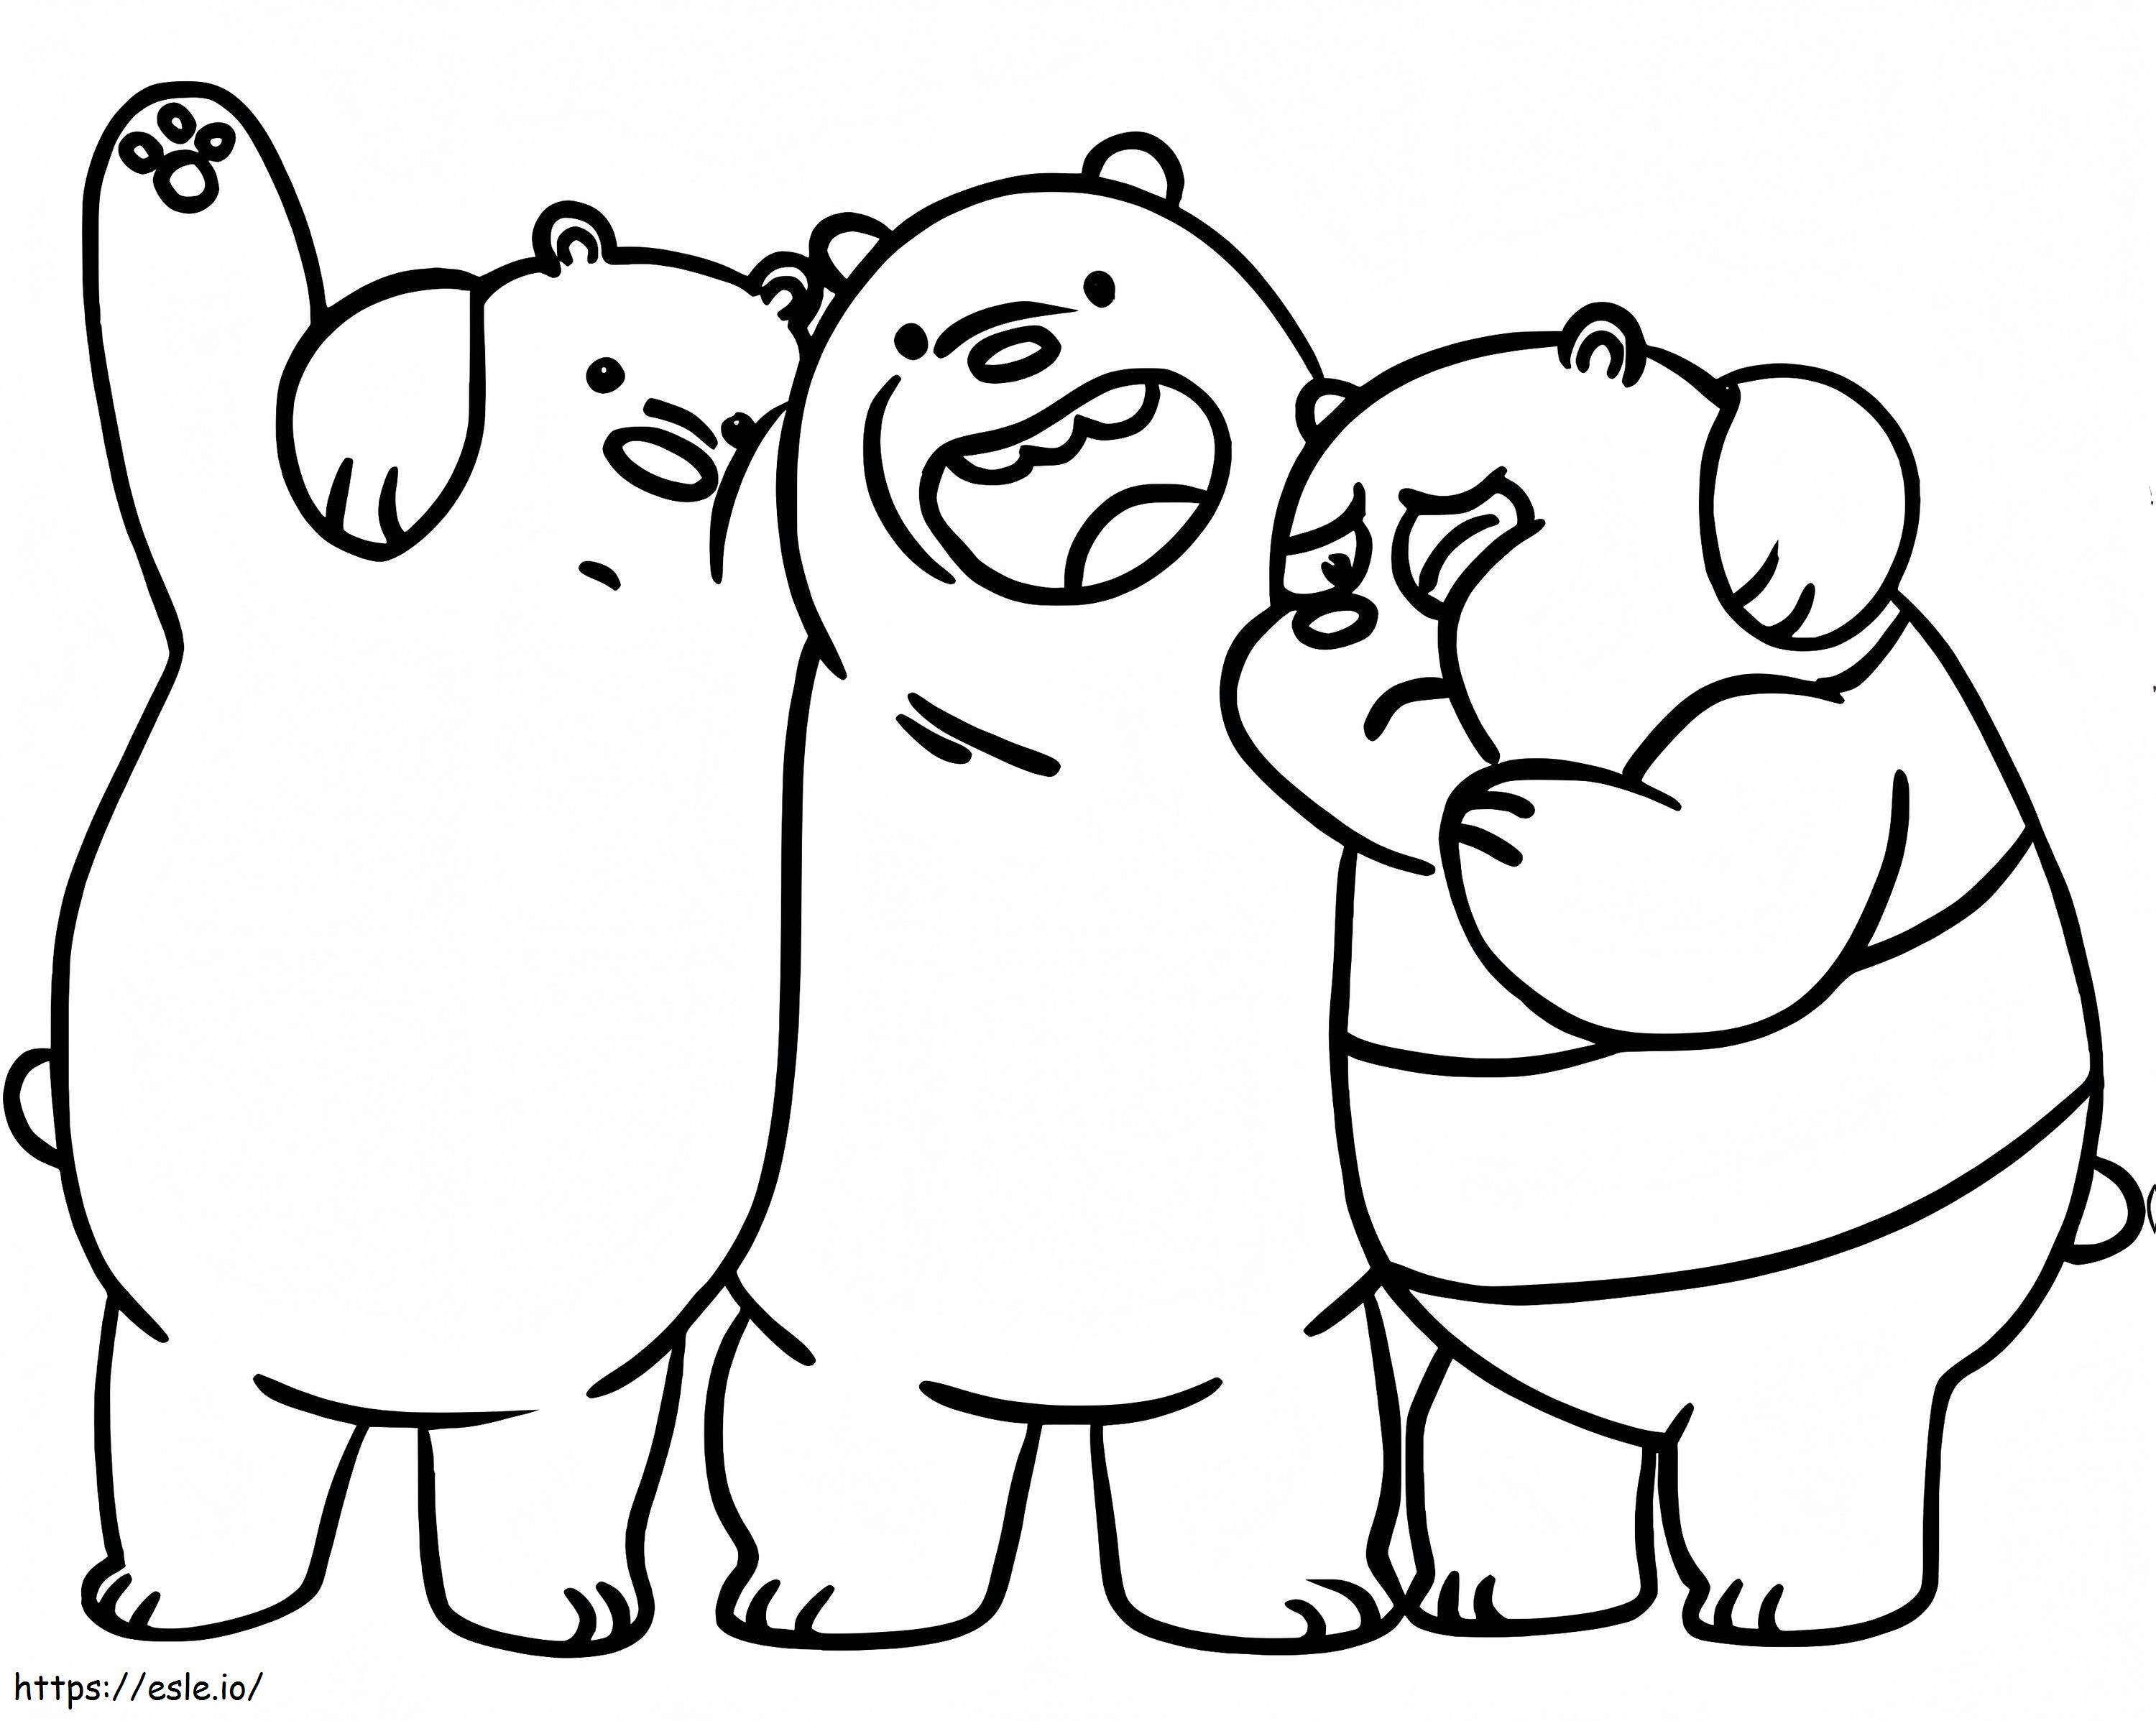 We Are Bear coloring page